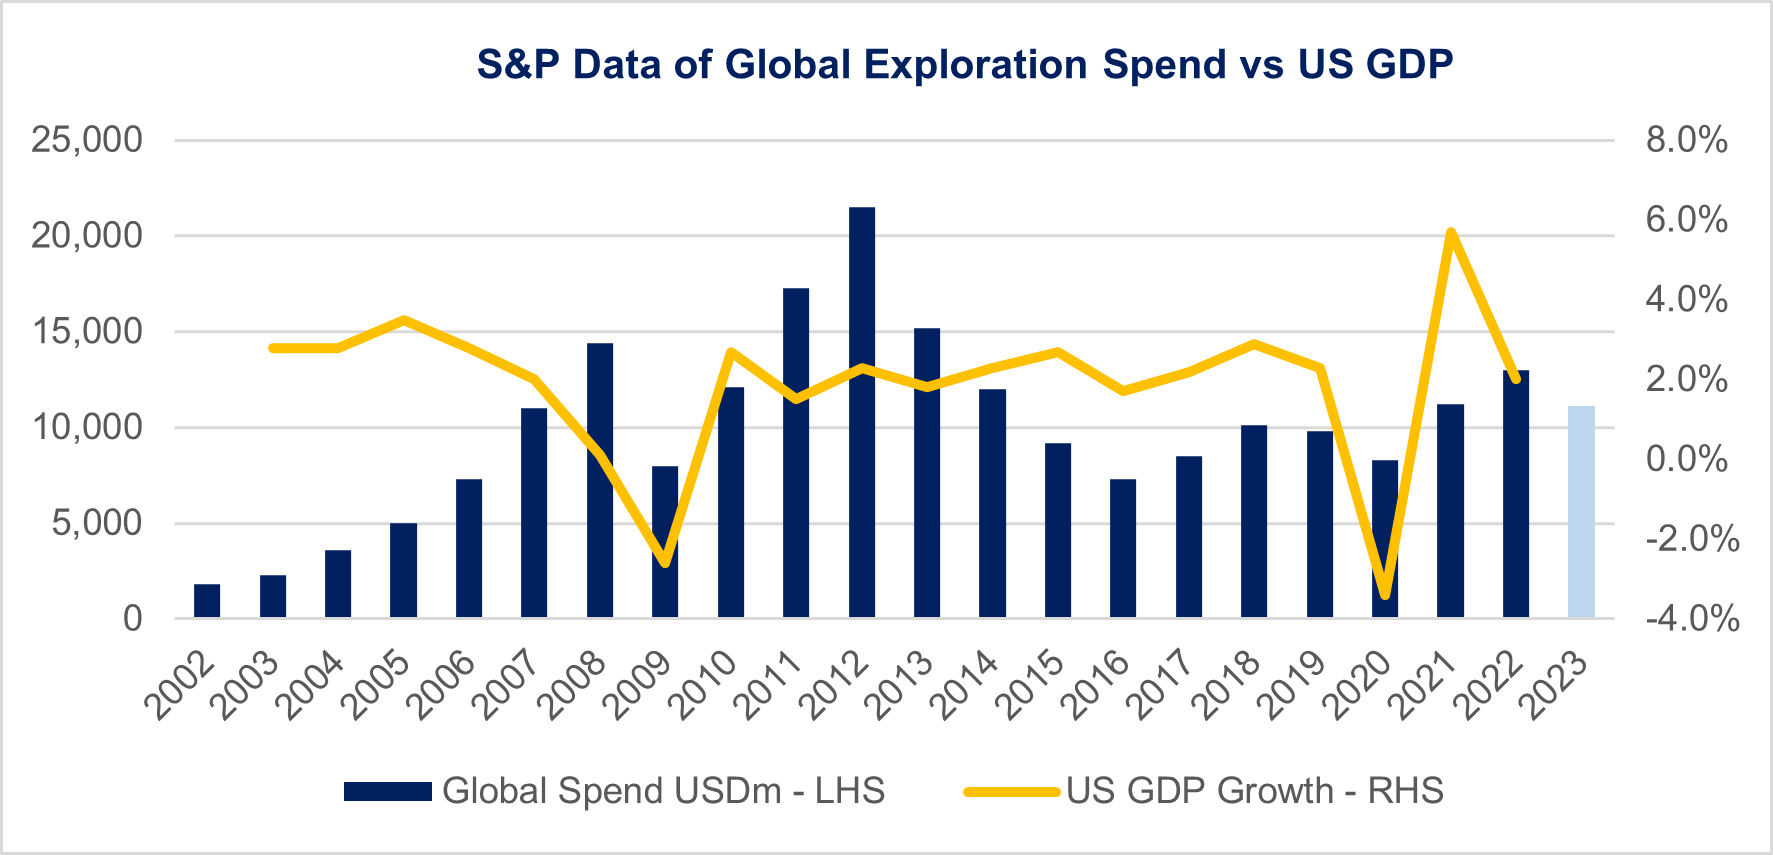 Source: Chester Asset Management with data from S&P Global Intelligence, Trading economics